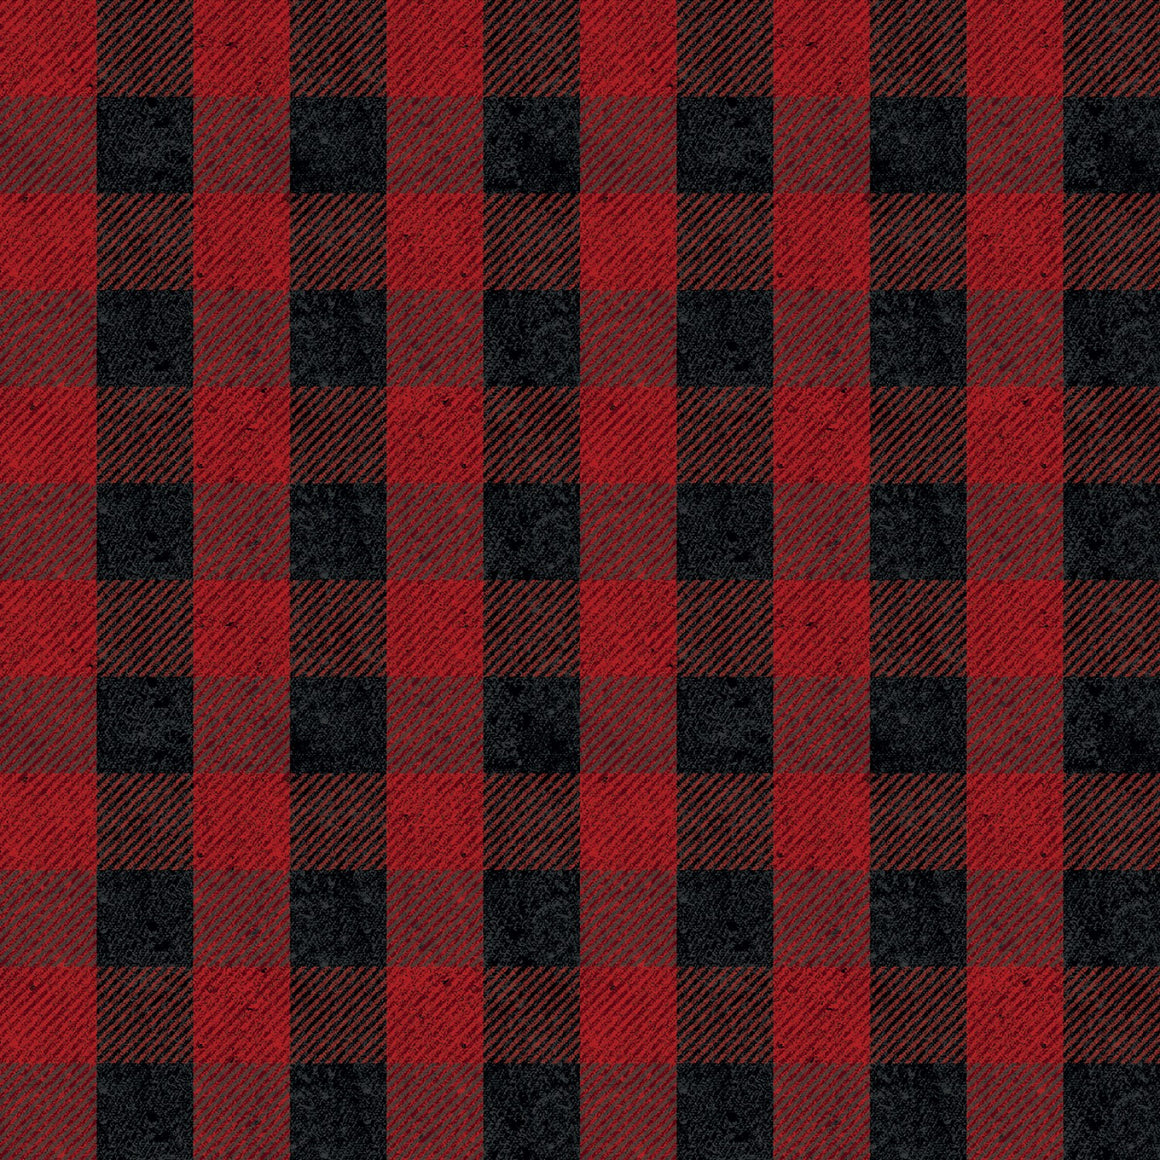 Flannel Buffalo Plaid Red And Black # F635R-RED